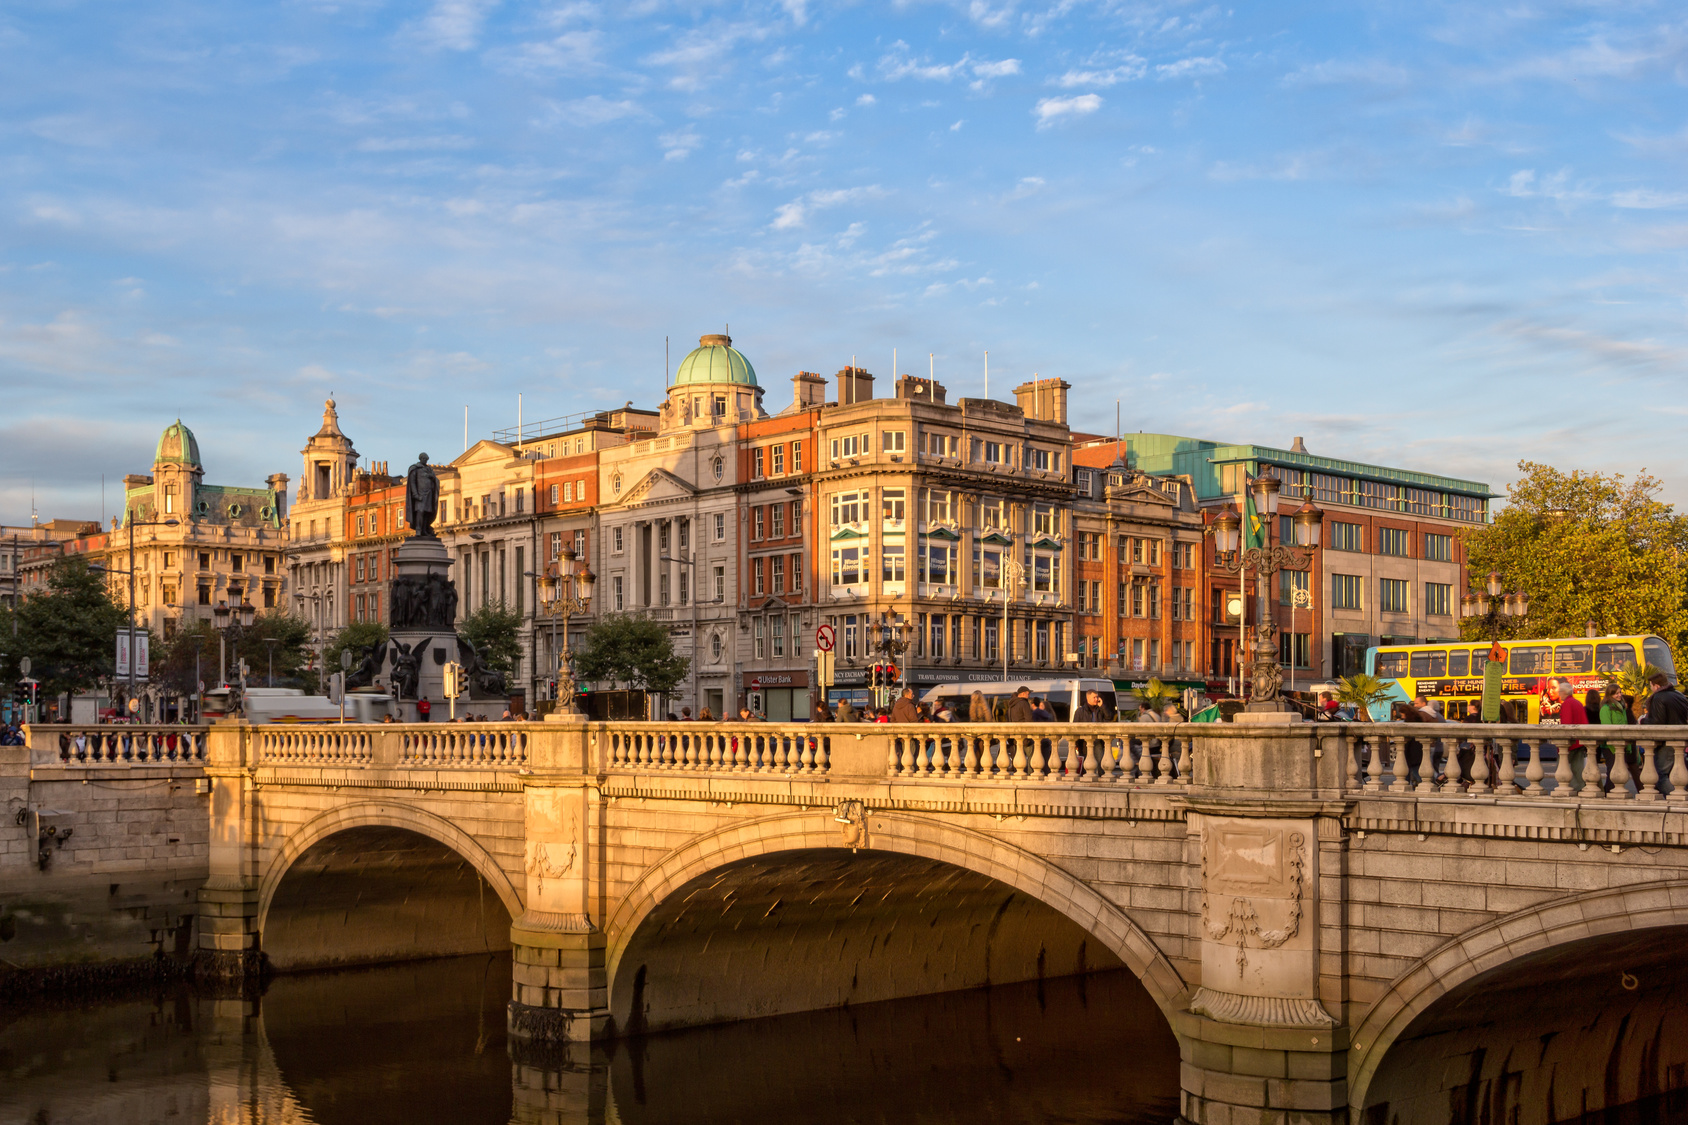 Irish businesses are already taking advantage of the IoT network